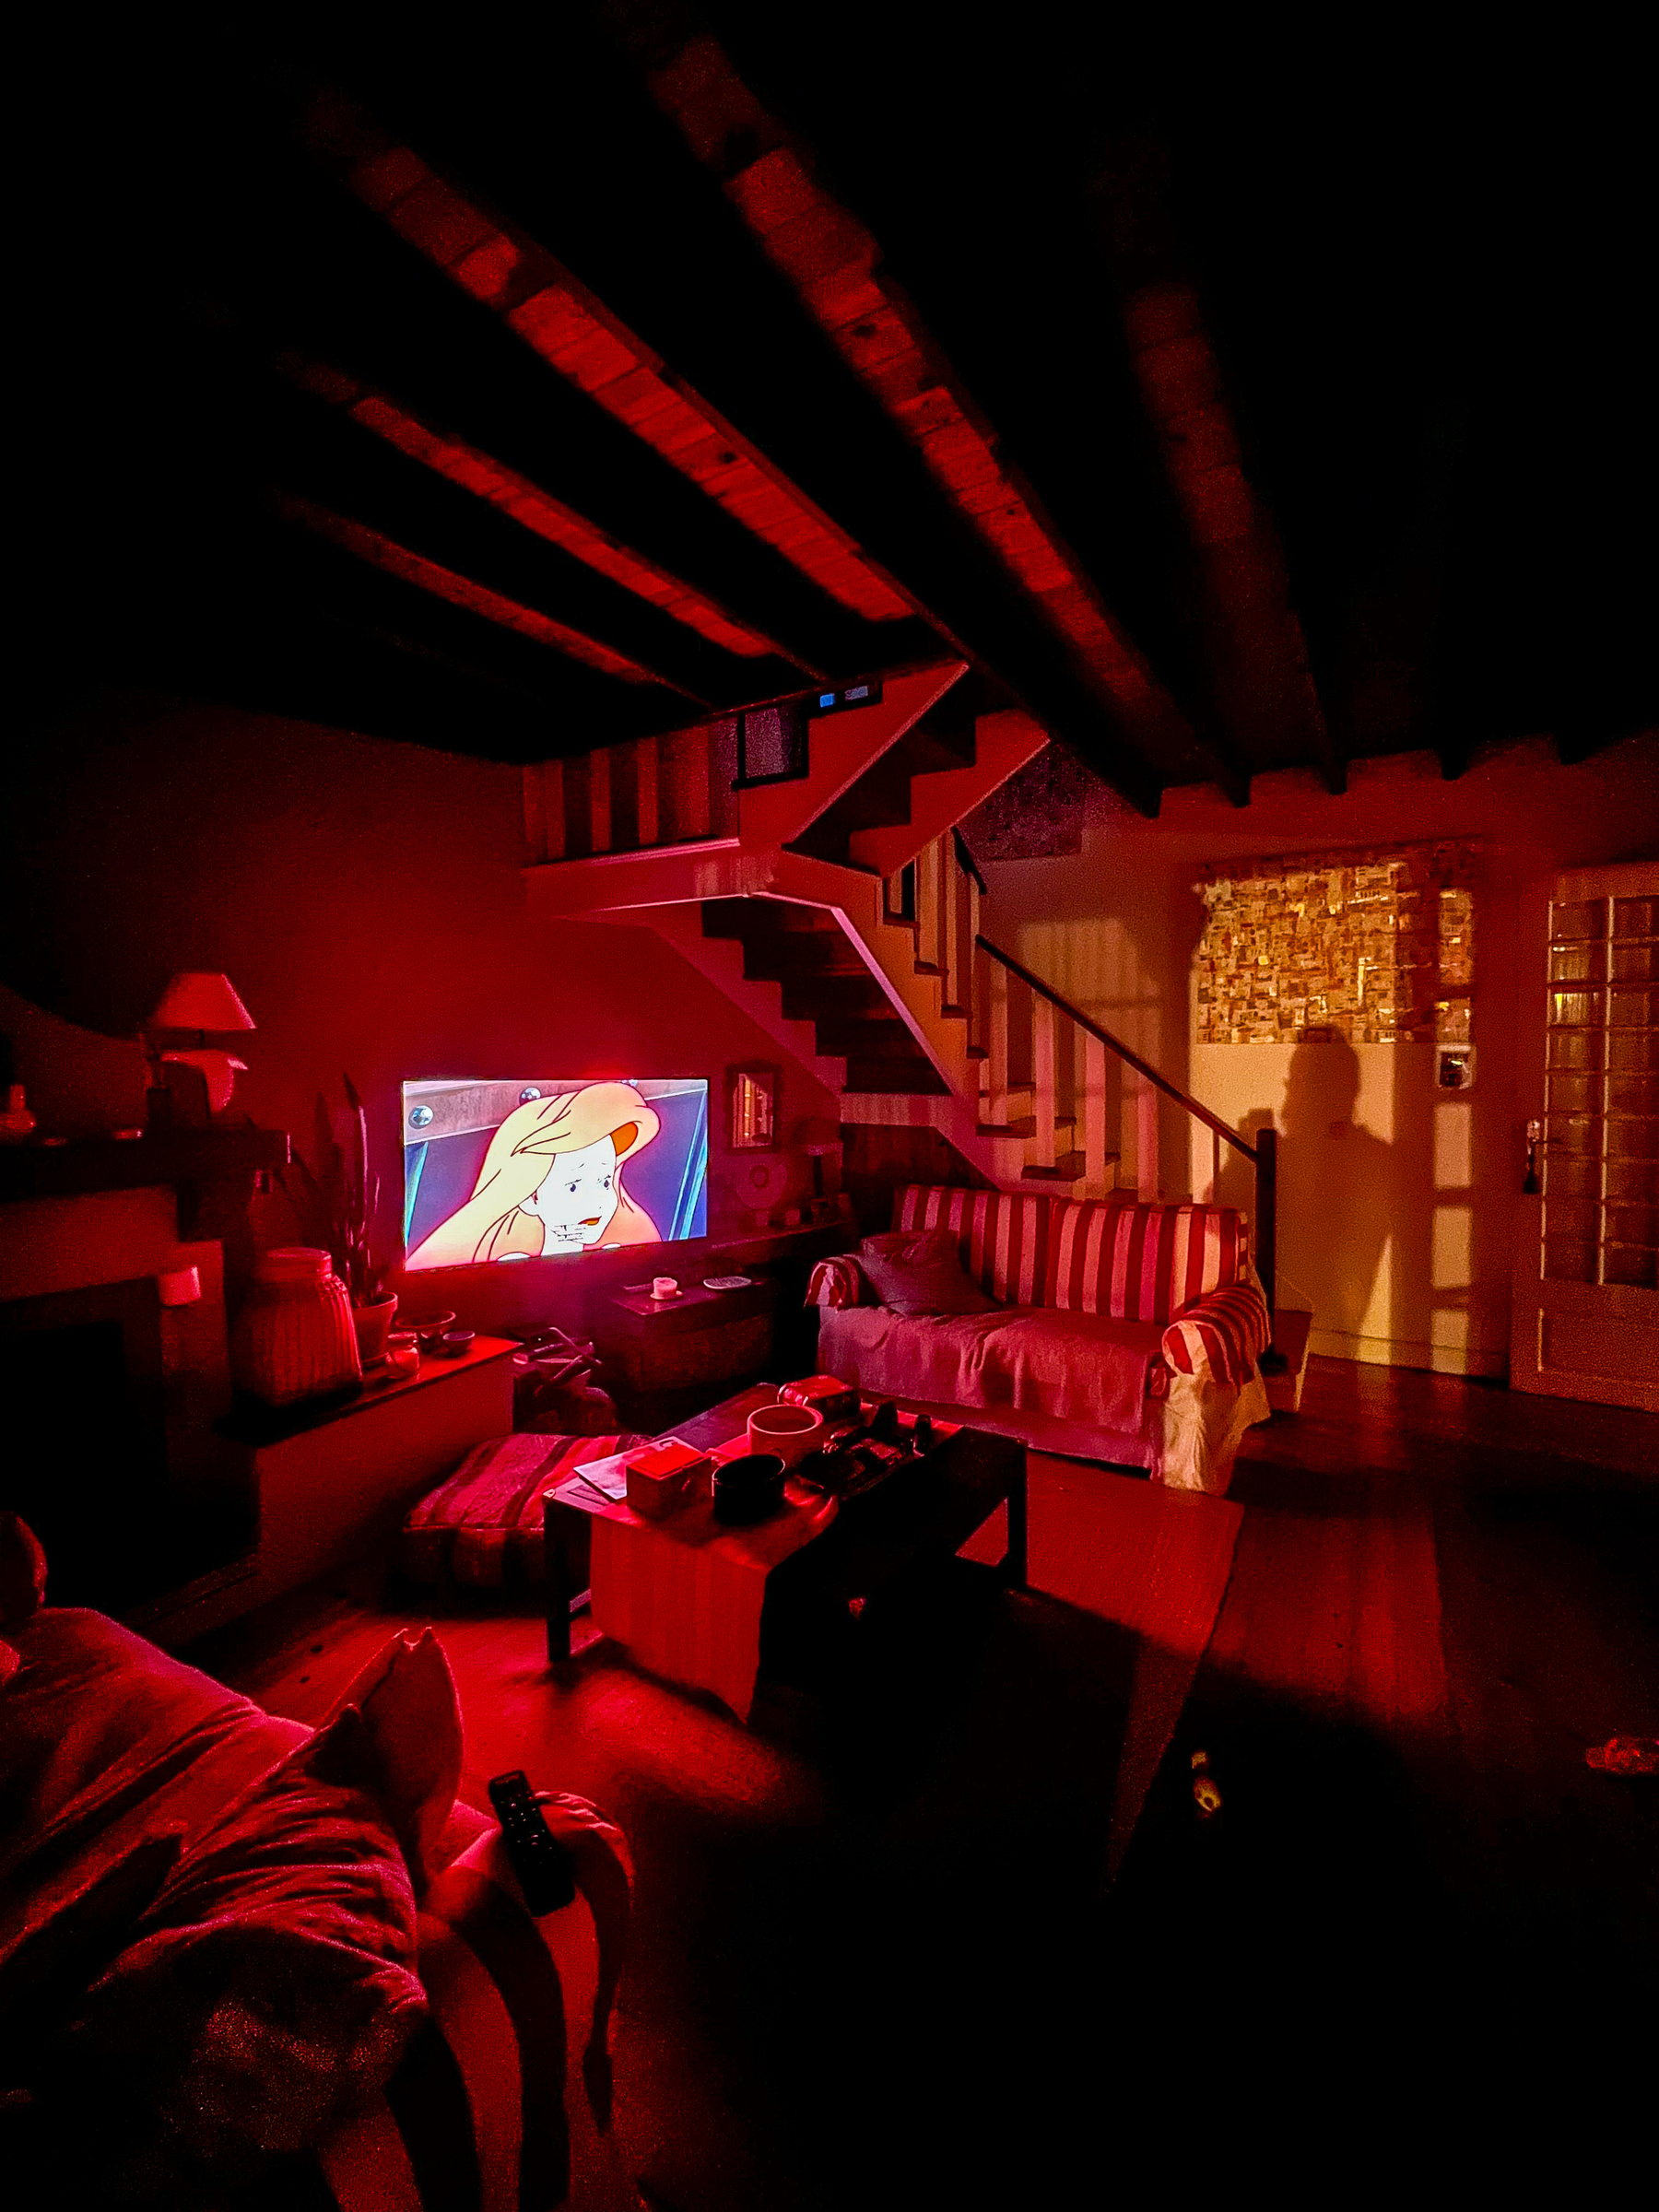 Ariel on tv, the whole room is red. You can spot a shadow where the photographer is hiding. 